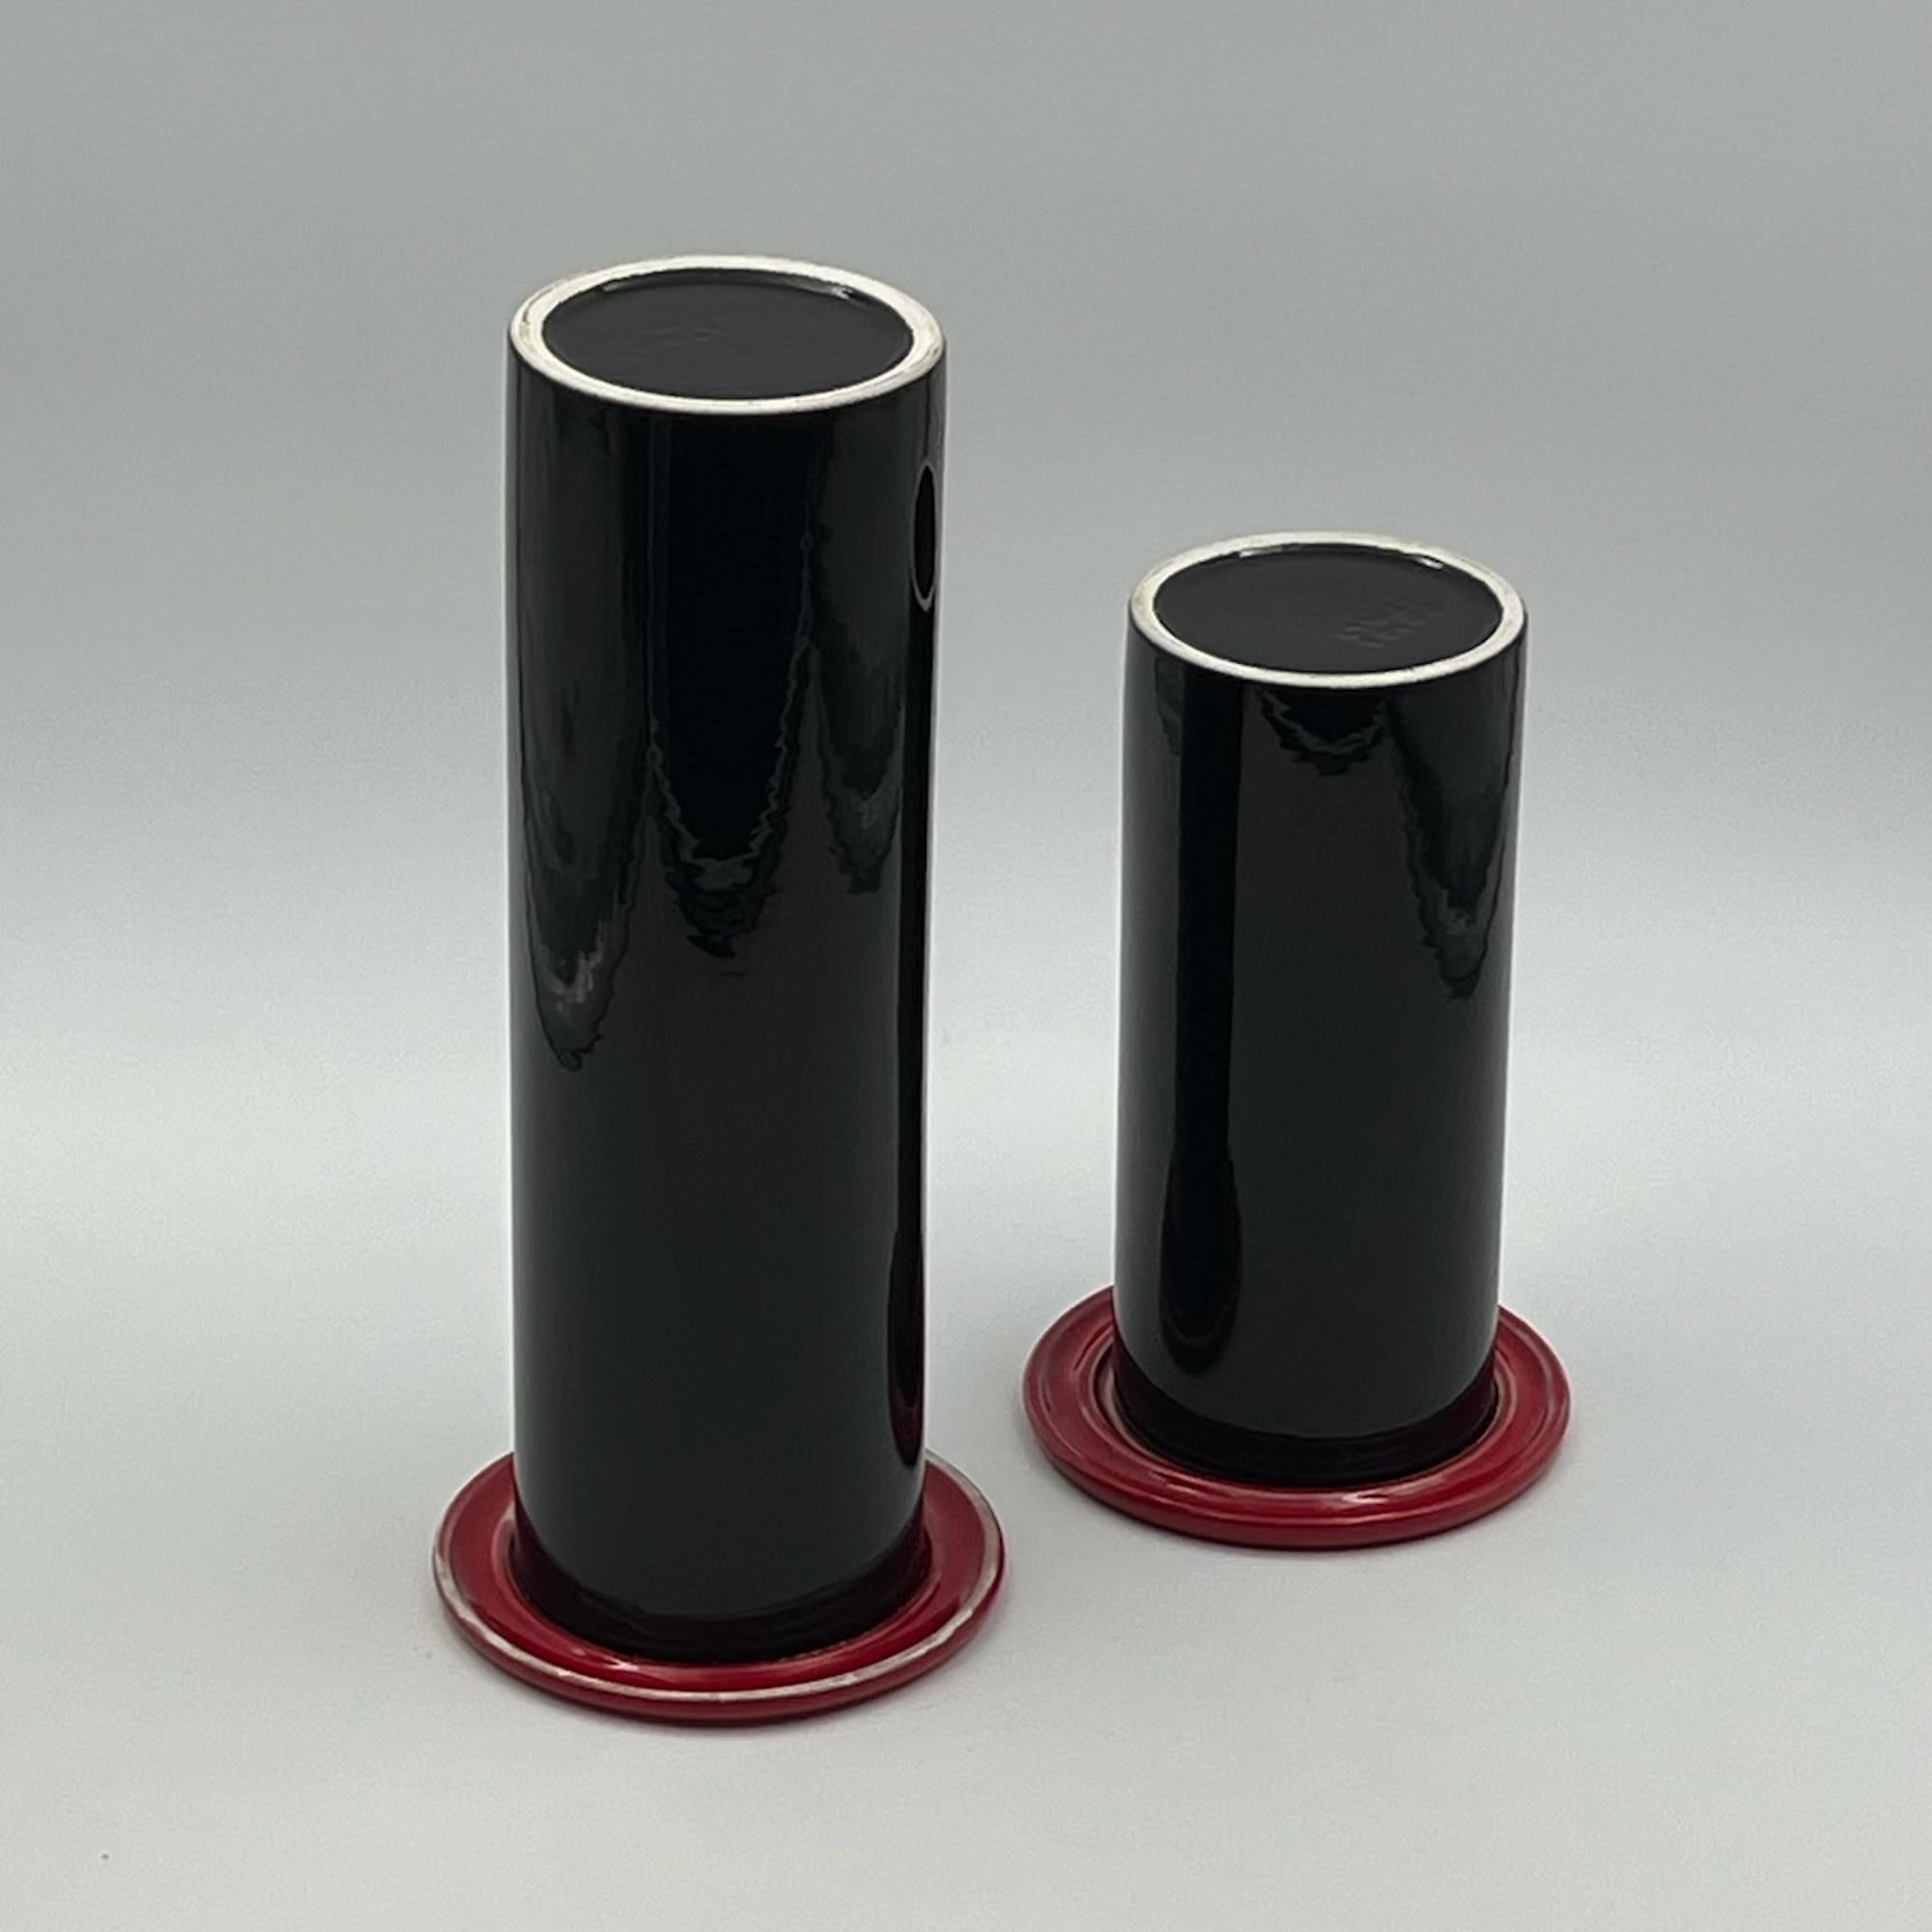 Late 20th Century 80s Design Ceramic Vases - Modern Vintage Home Decor Made in Italy - set of 2 For Sale